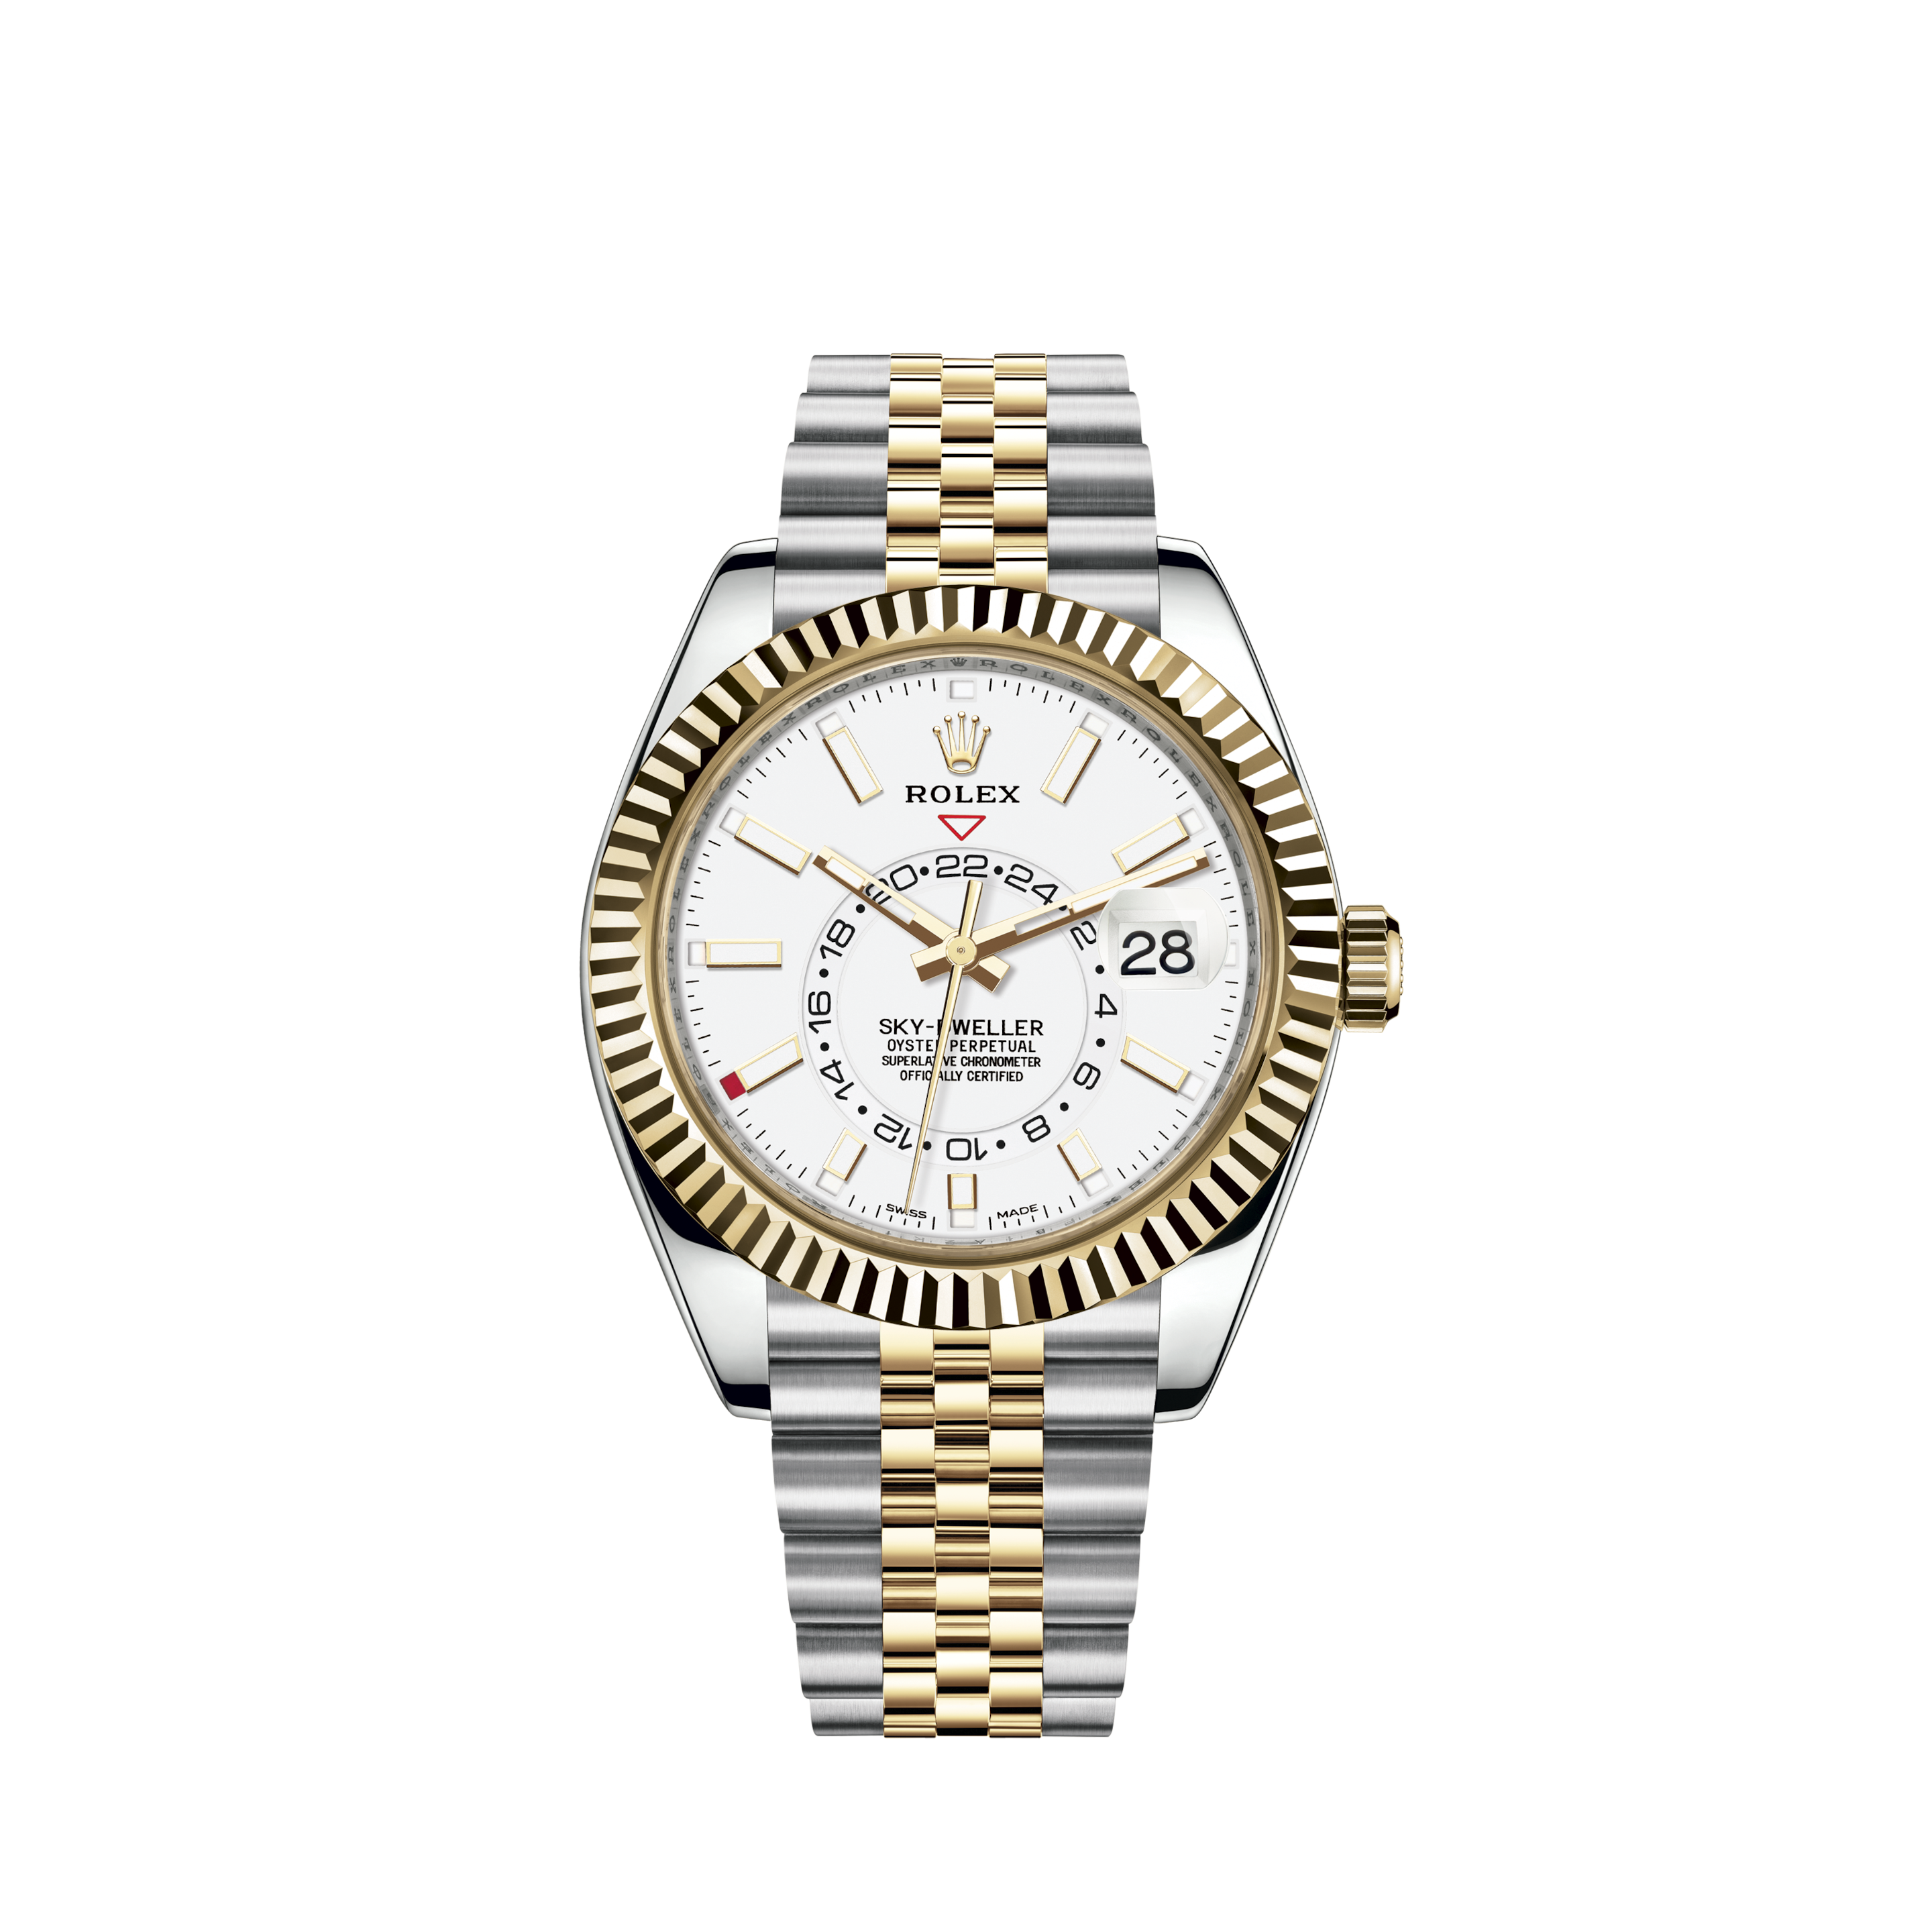 Rolex 26mm Datejust With custom Diamond bezel SS White Color Dial with Diamonds Deployment buckleRolex 26mm Datejust With custom Diamond bezel SS White Color Jubilee Dial Bezel and Lugs with Diamonds Deployment buckle